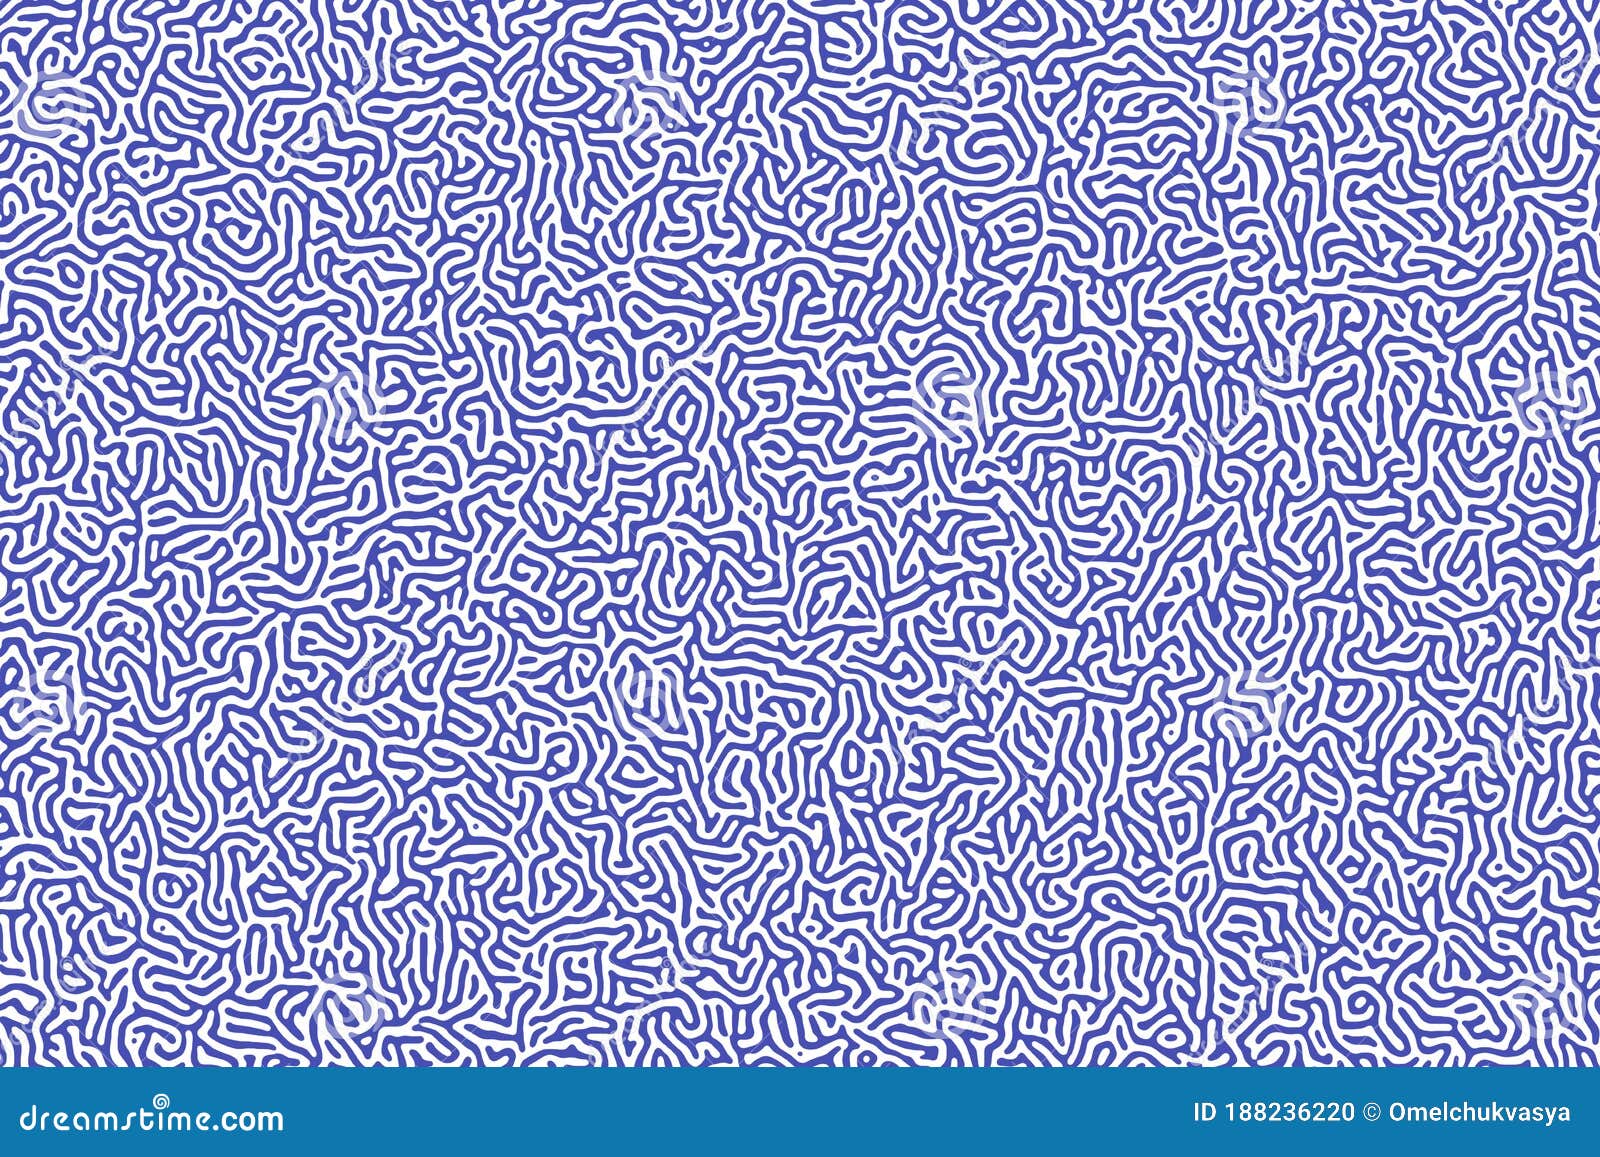 seamless turing pattern. texture background